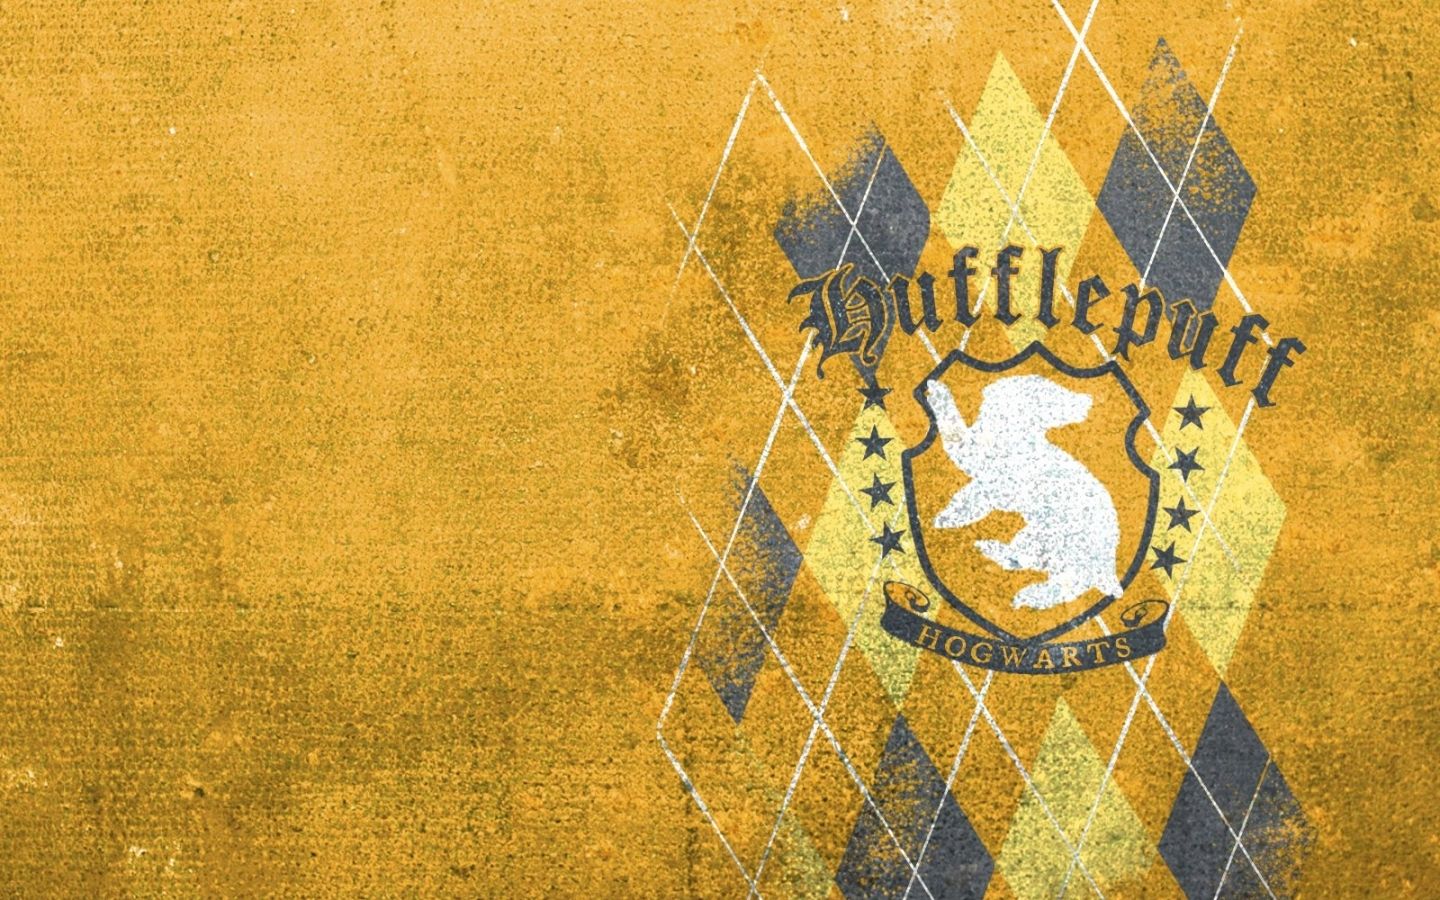 A yellow and black argyle pattern with the Hufflepuff crest in the middle - Hufflepuff